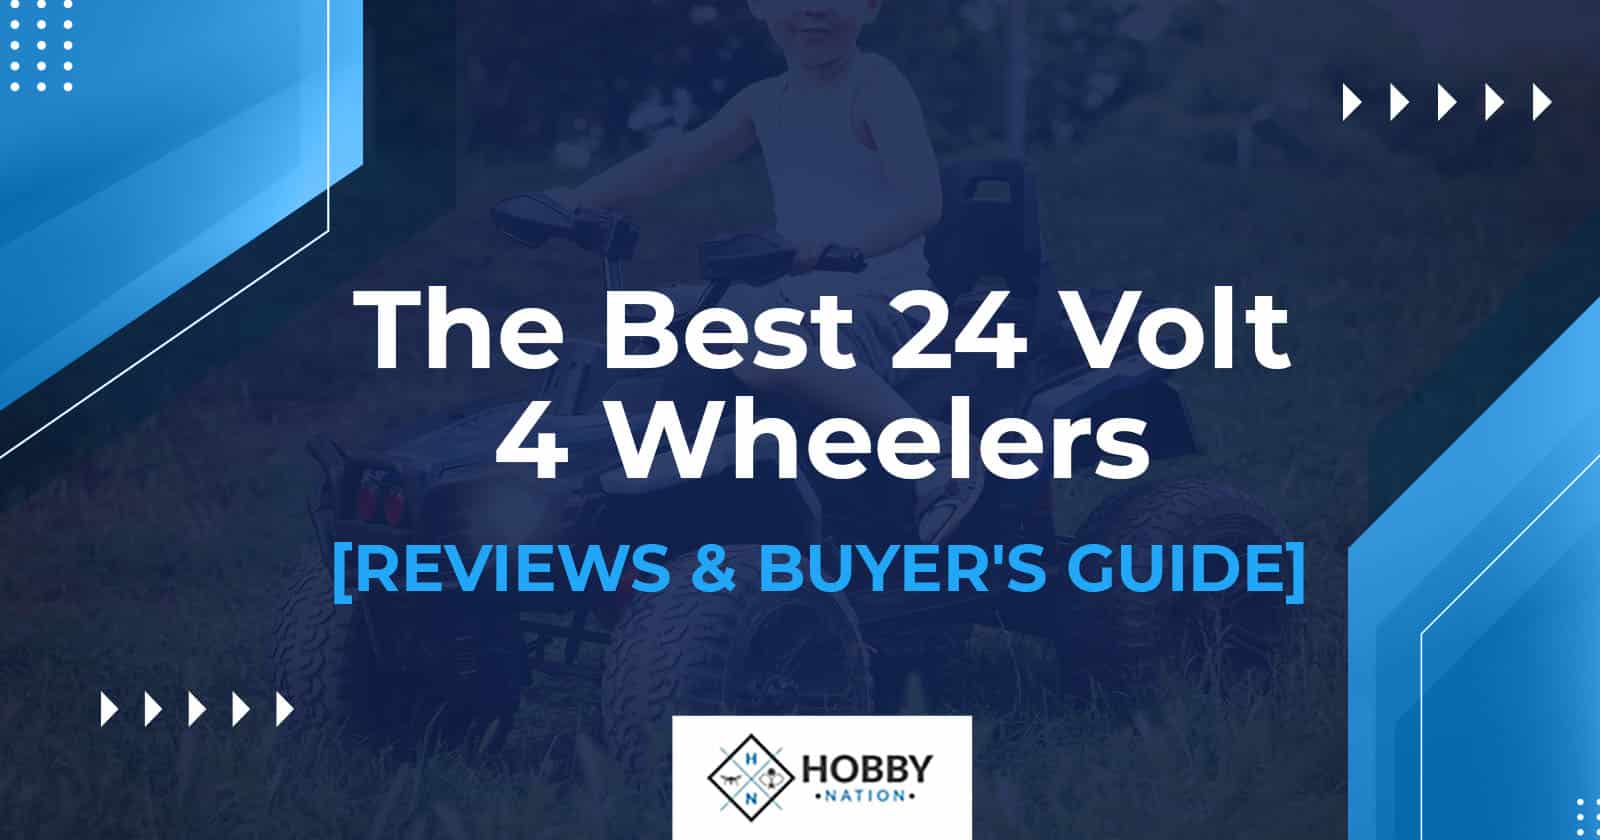 The Best 24 Volt 4 Wheelers [REVIEWS &#038; BUYER'S GUIDE]